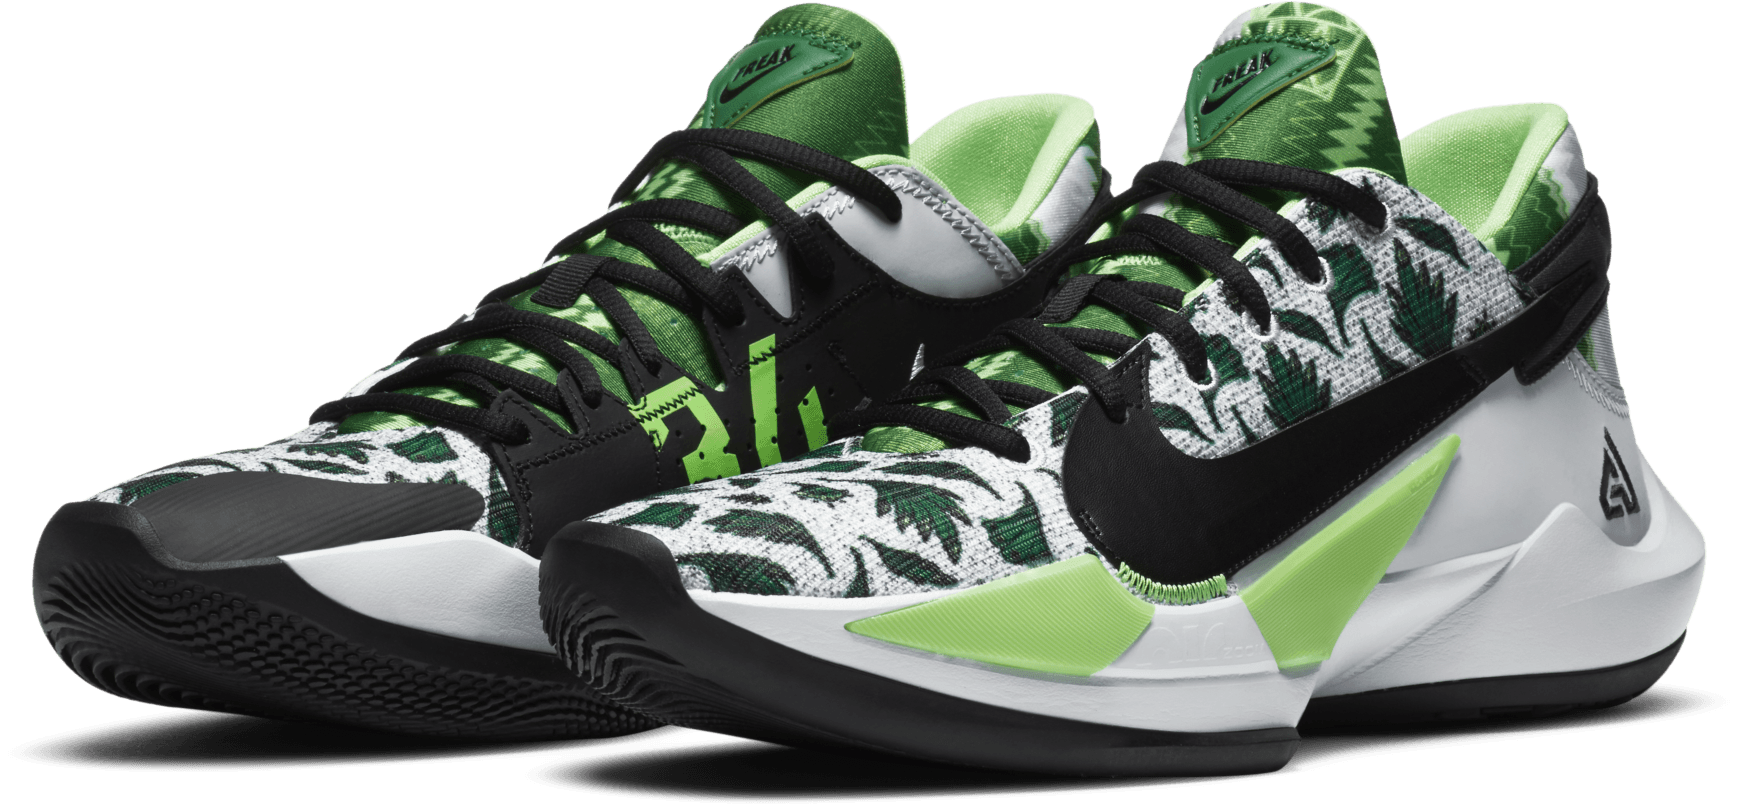 The 10 Best Outdoor Basketball Shoes in 